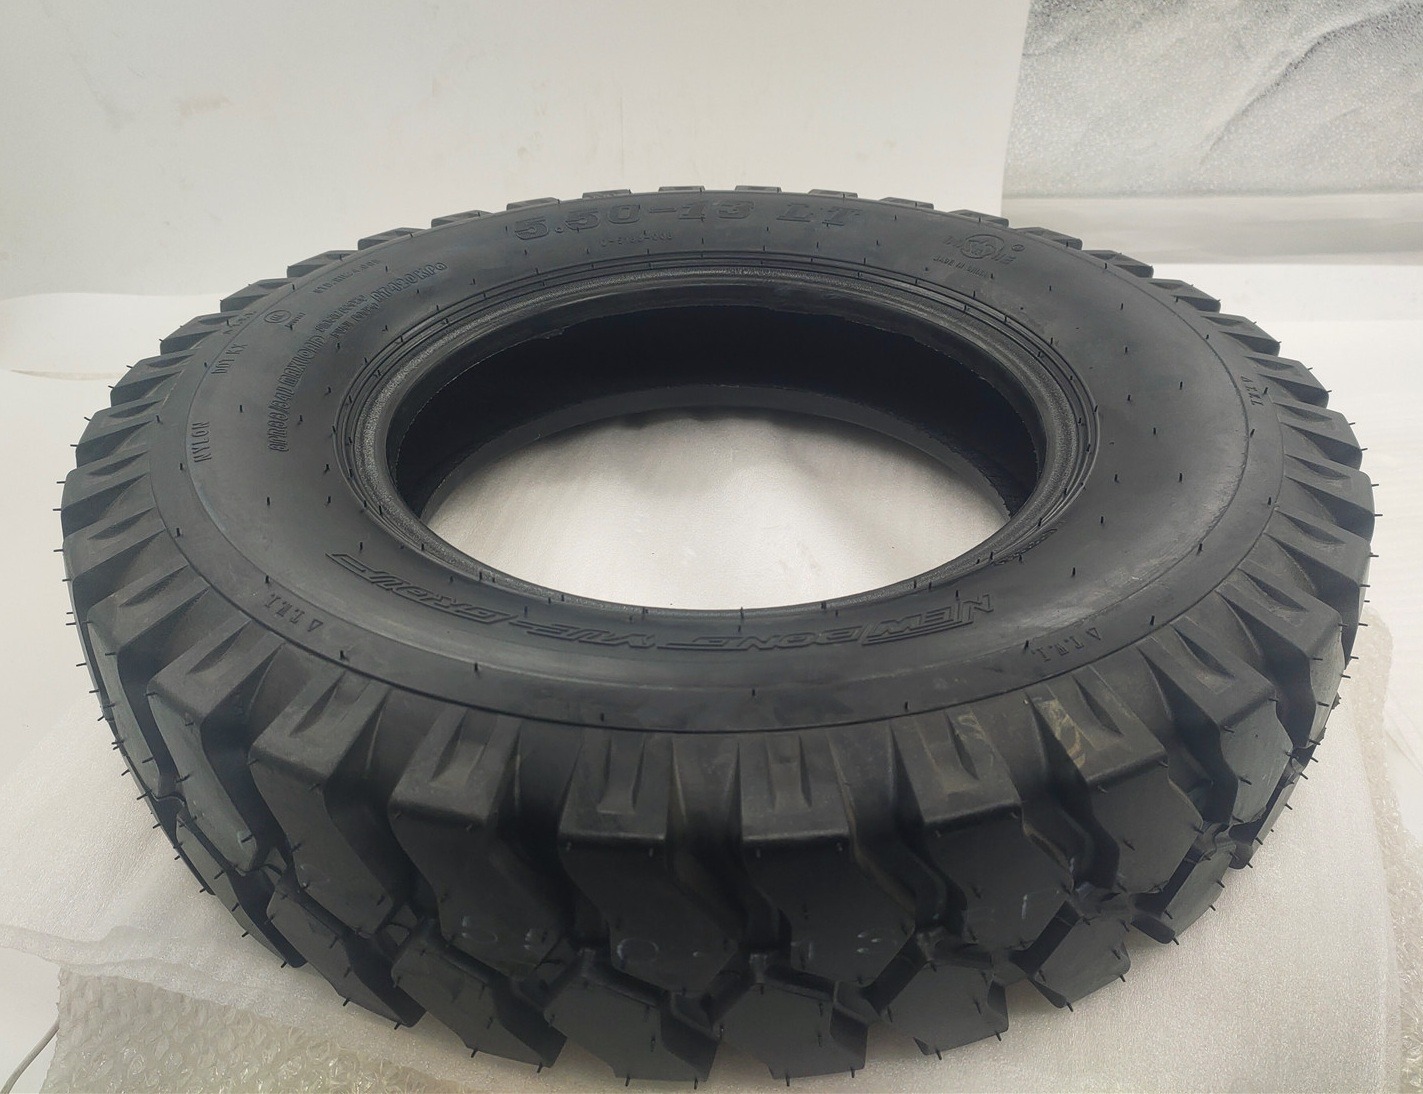 DAYANG Factory 5.5-13 Casing Pattern Rubber CCC Origin Type Certificate Shandong Tube Size Tyre Product for replacement